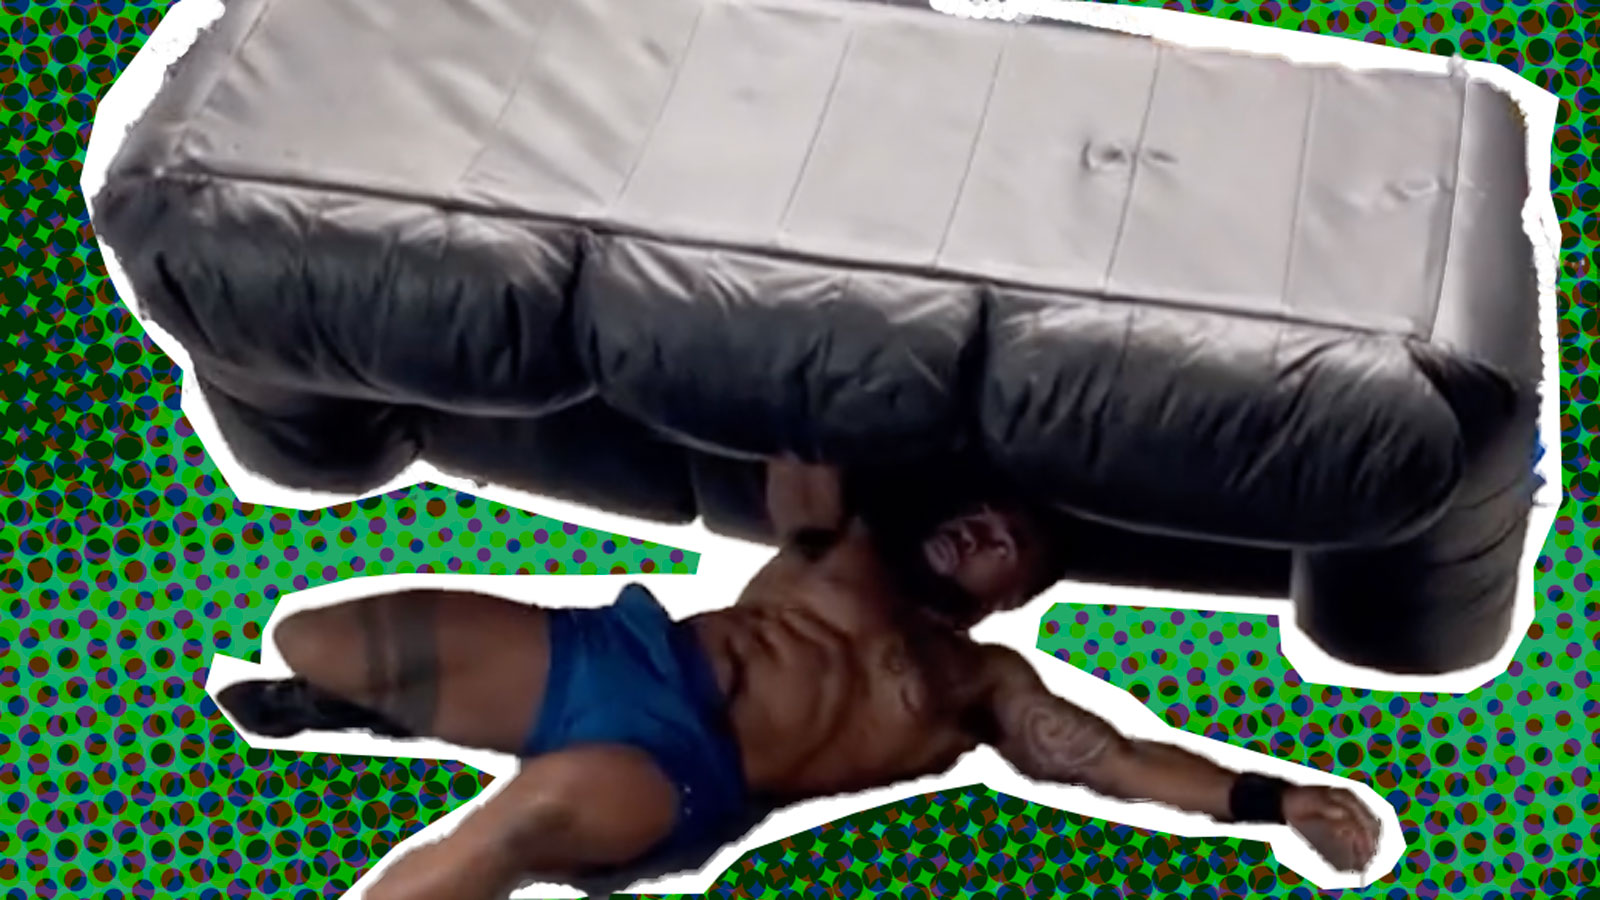 American Man Takes Full Body Training To The Extreme With Crazy ‘Couch Workout’